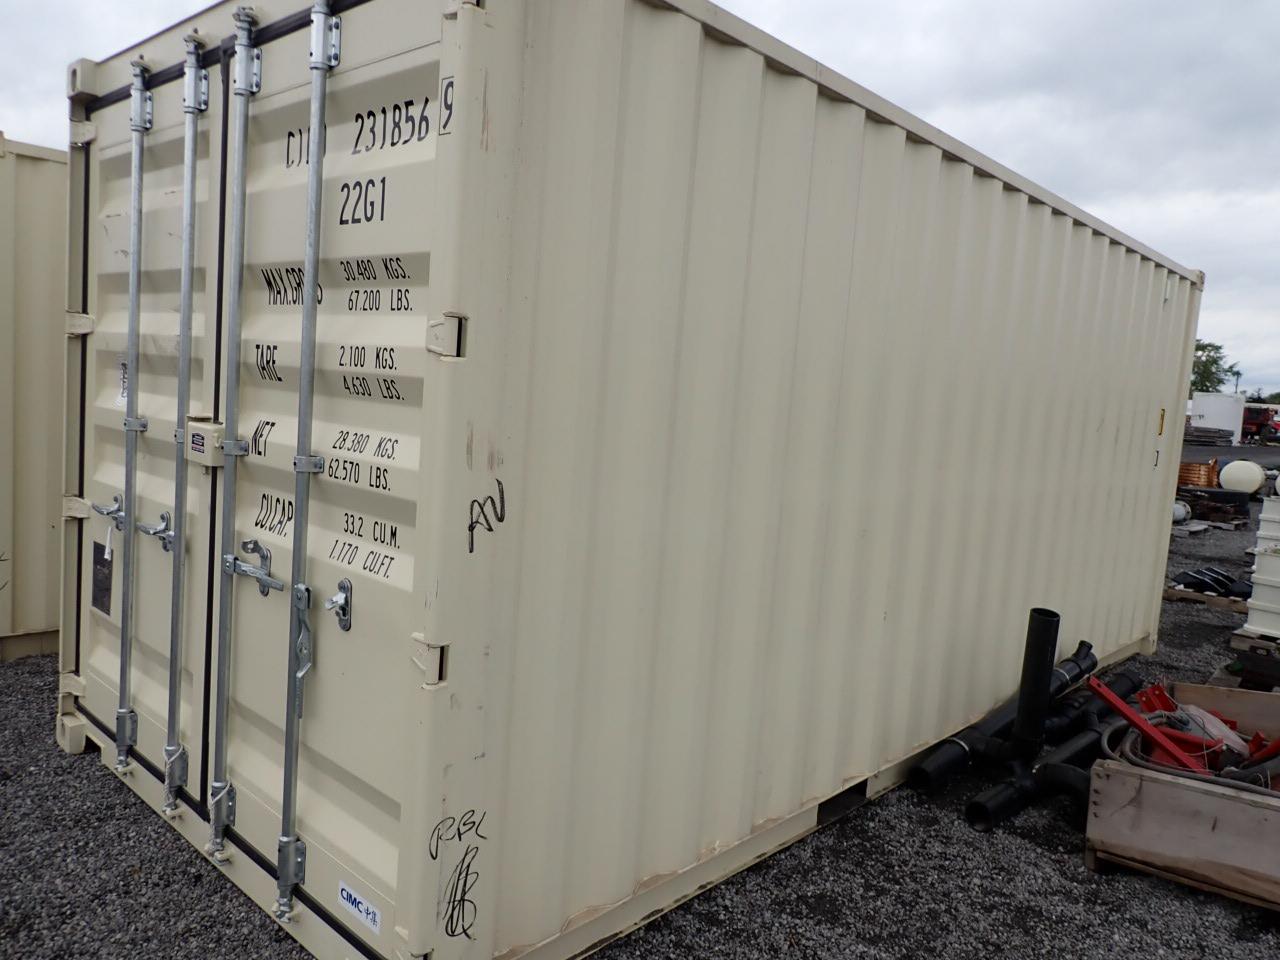 20' New One Way Storage Container